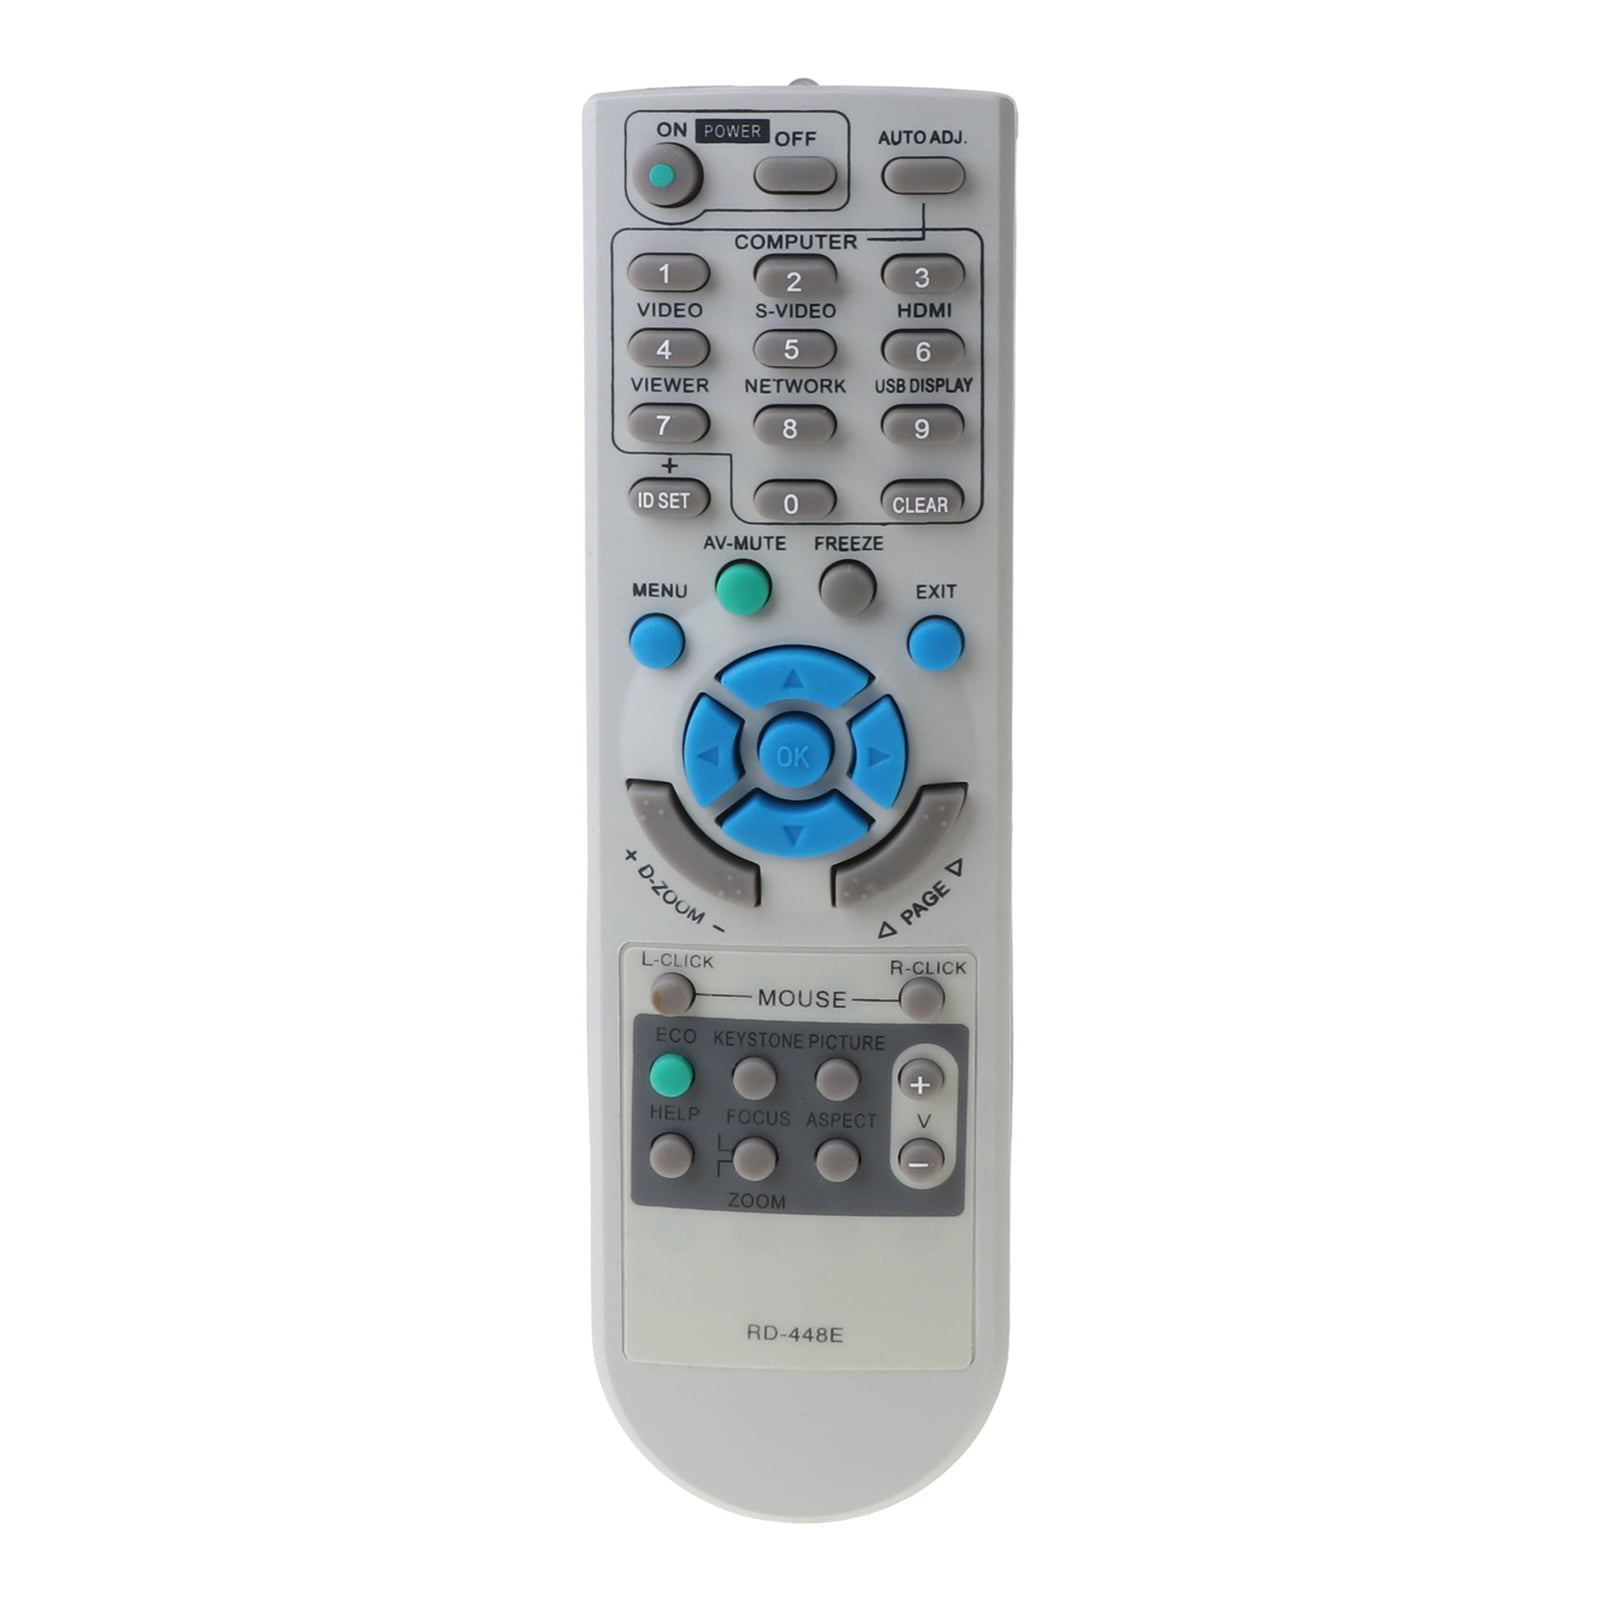 EASY Replacement Remote Control for NEC VT695 NP3150 T380G Projector 